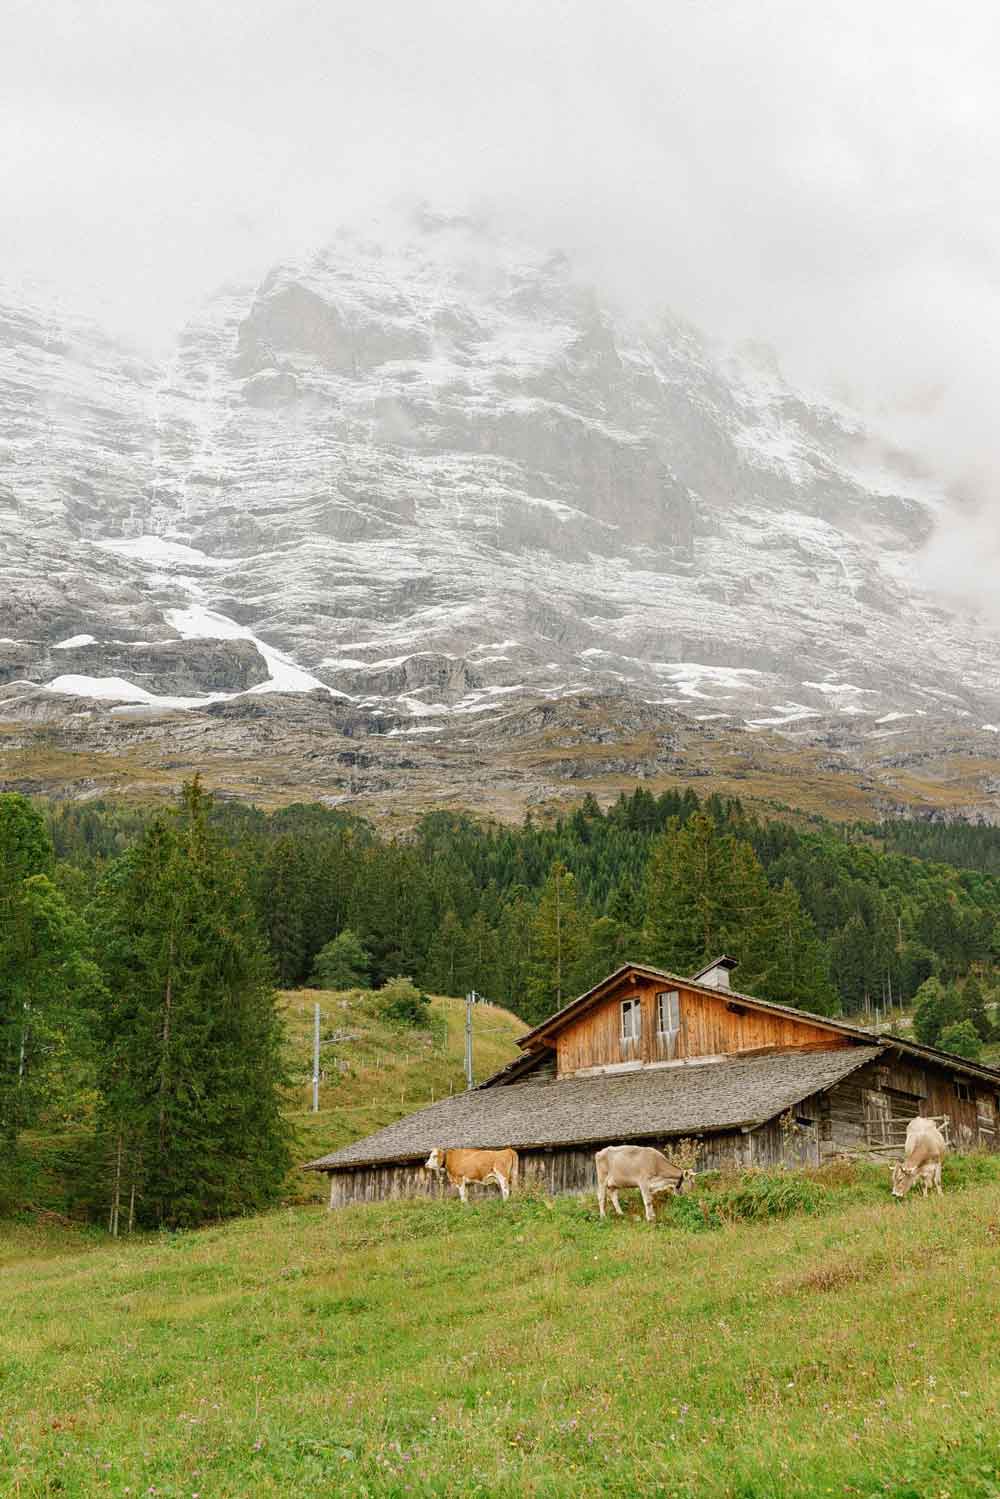 Where to Go if You Want to See Cows in Switzerland image